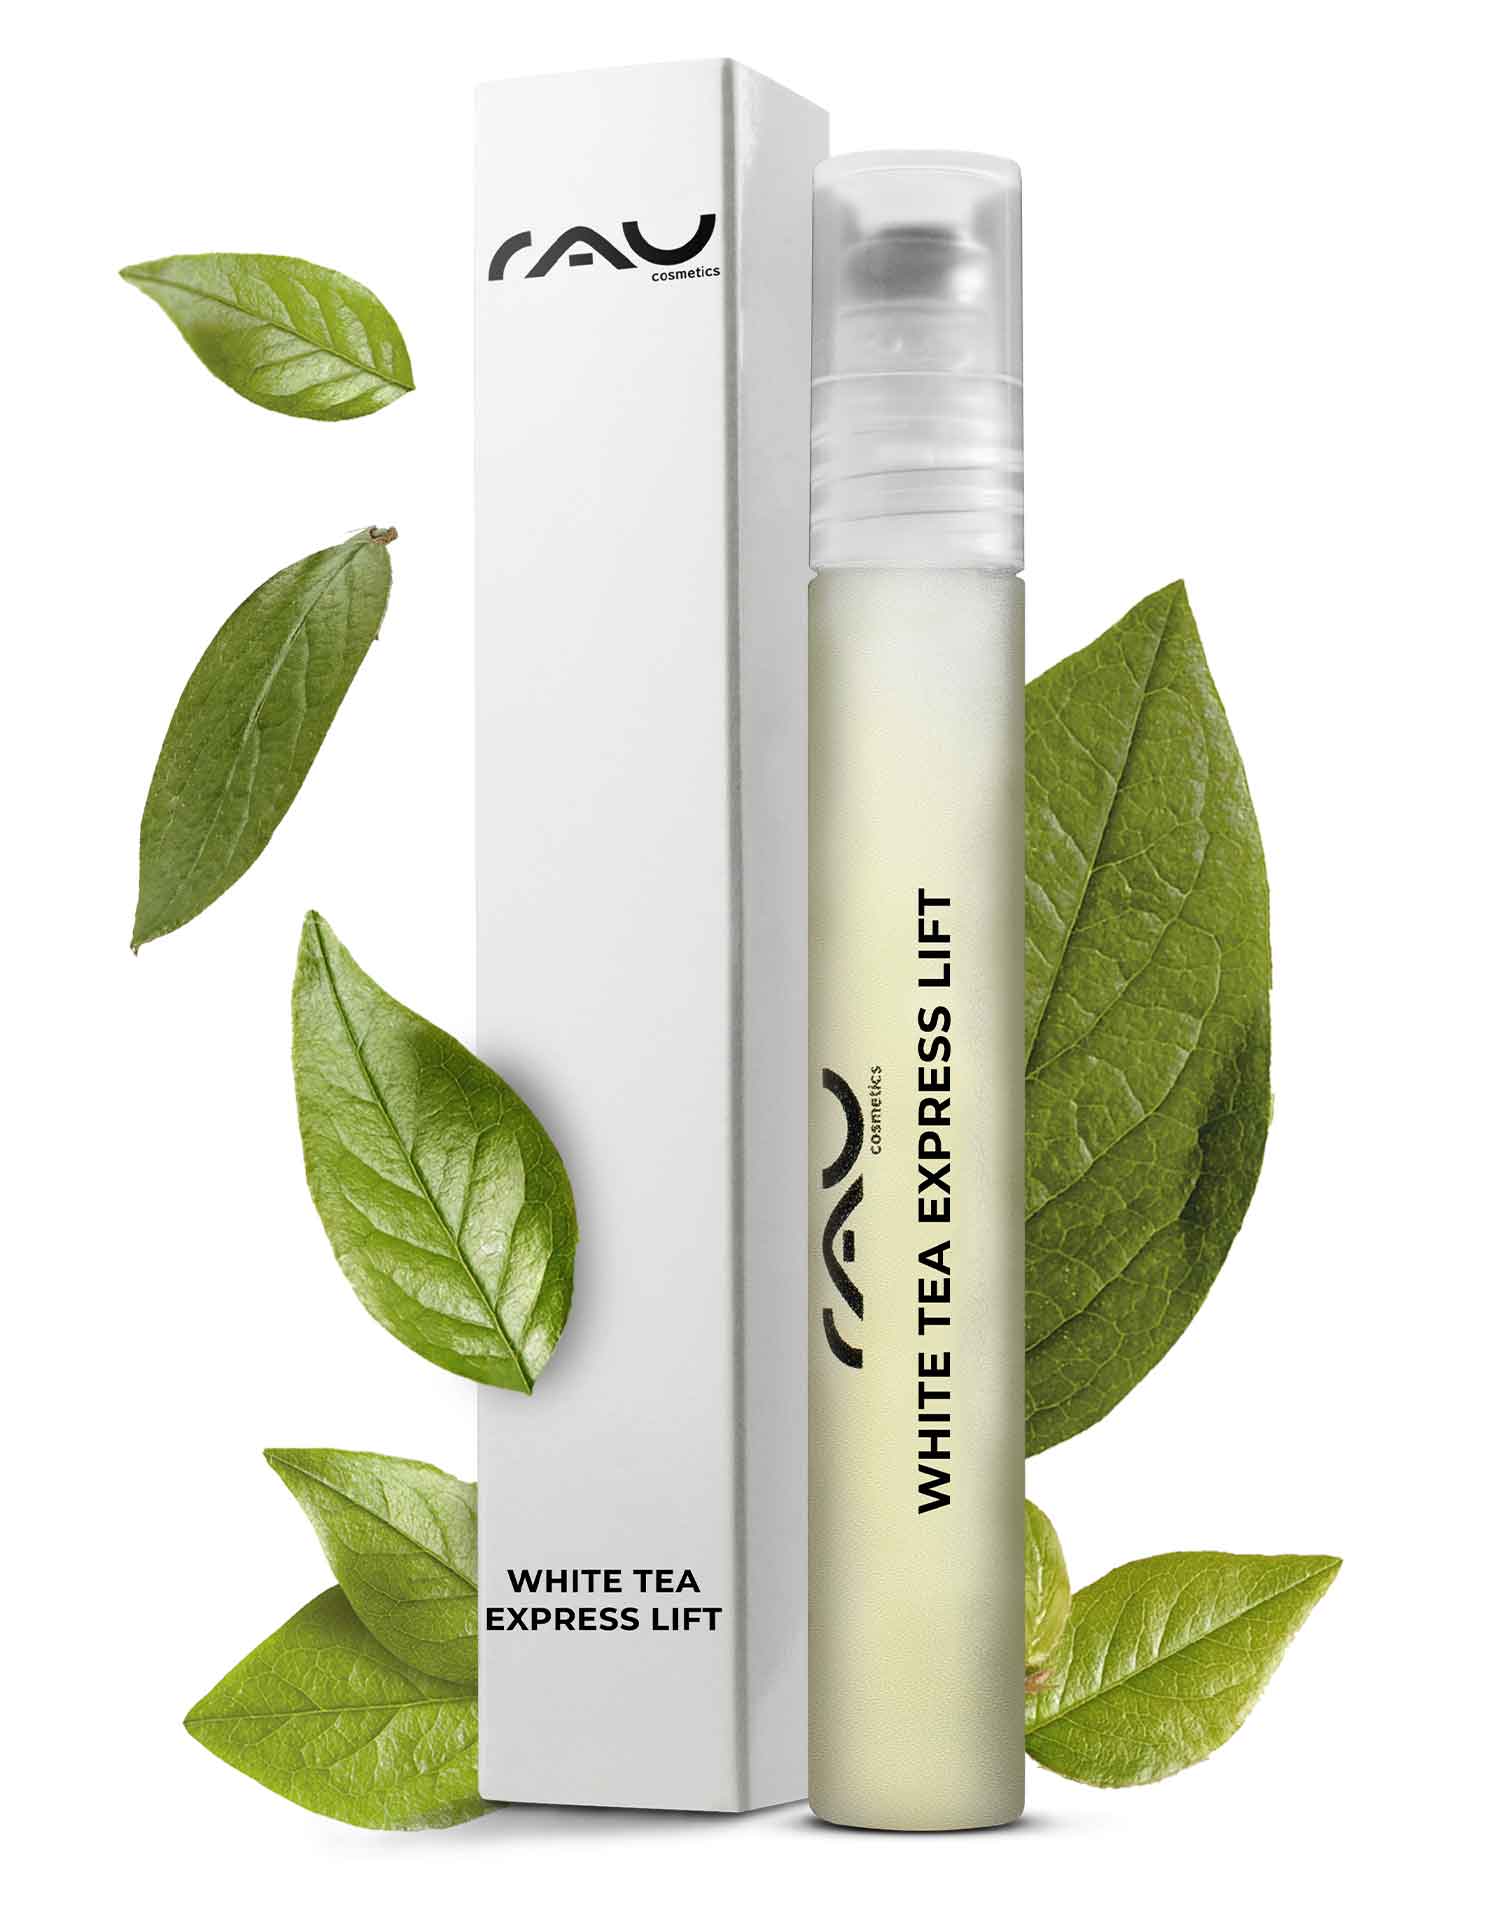 RAU White Tea Express Lift Roll-On - Intensively Caring Serum in a Handy Roll-On Applicator